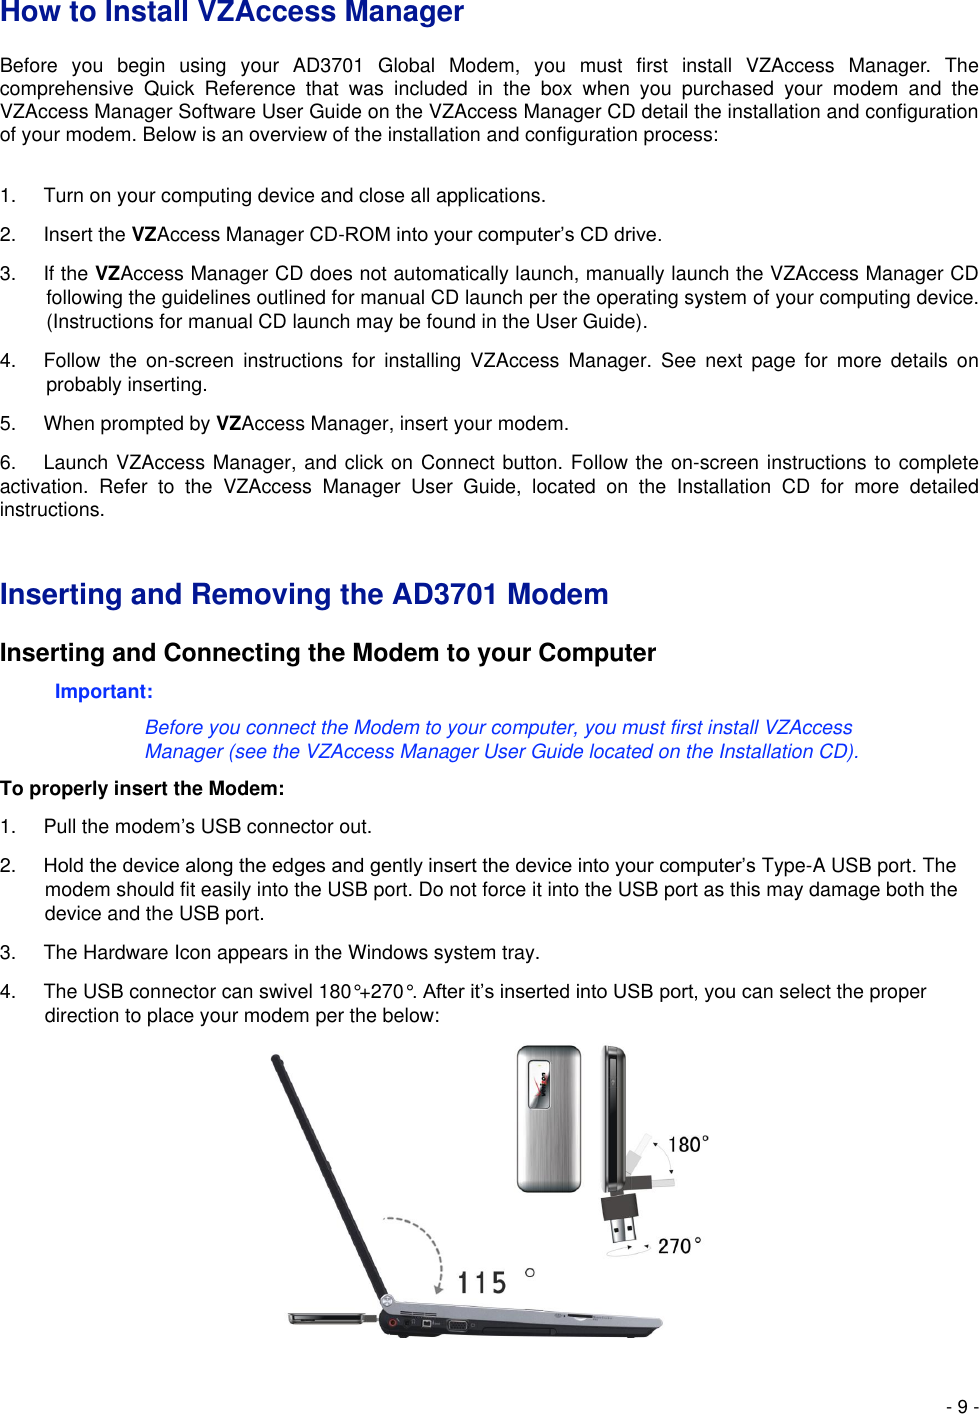  - 9 - How to Install VZAccess Manager   Before  you  begin  using  your  AD3701  Global  Modem,  you  must  first  install  VZAccess  Manager.  The comprehensive  Quick  Reference  that  was  included  in  the  box  when  you  purchased  your  modem  and  the VZAccess Manager Software User Guide on the VZAccess Manager CD detail the installation and configuration of your modem. Below is an overview of the installation and configuration process:  1.  Turn on your computing device and close all applications.   2.  Insert the VZAccess Manager CD-ROM into your computer’s CD drive.   3.  If the VZAccess Manager CD does not automatically launch, manually launch the VZAccess Manager CD following the guidelines outlined for manual CD launch per the operating system of your computing device. (Instructions for manual CD launch may be found in the User Guide).   4.  Follow  the  on-screen  instructions  for  installing  VZAccess  Manager.  See  next  page  for  more  details  on probably inserting. 5.  When prompted by VZAccess Manager, insert your modem.   6. Launch VZAccess Manager, and click on Connect button. Follow the on-screen instructions to complete activation.  Refer  to  the  VZAccess  Manager  User  Guide,  located  on  the  Installation  CD  for  more  detailed instructions.   Inserting and Removing the AD3701 Modem   Inserting and Connecting the Modem to your Computer   Important: Before you connect the Modem to your computer, you must first install VZAccess Manager (see the VZAccess Manager User Guide located on the Installation CD).   To properly insert the Modem:   1.  Pull the modem’s USB connector out.   2. Hold the device along the edges and gently insert the device into your computer’s Type-A USB port. The modem should fit easily into the USB port. Do not force it into the USB port as this may damage both the device and the USB port.   3.  The Hardware Icon appears in the Windows system tray.   4.  The USB connector can swivel 180°+270°. After it’s inserted into USB port, you can select the proper direction to place your modem per the below:          